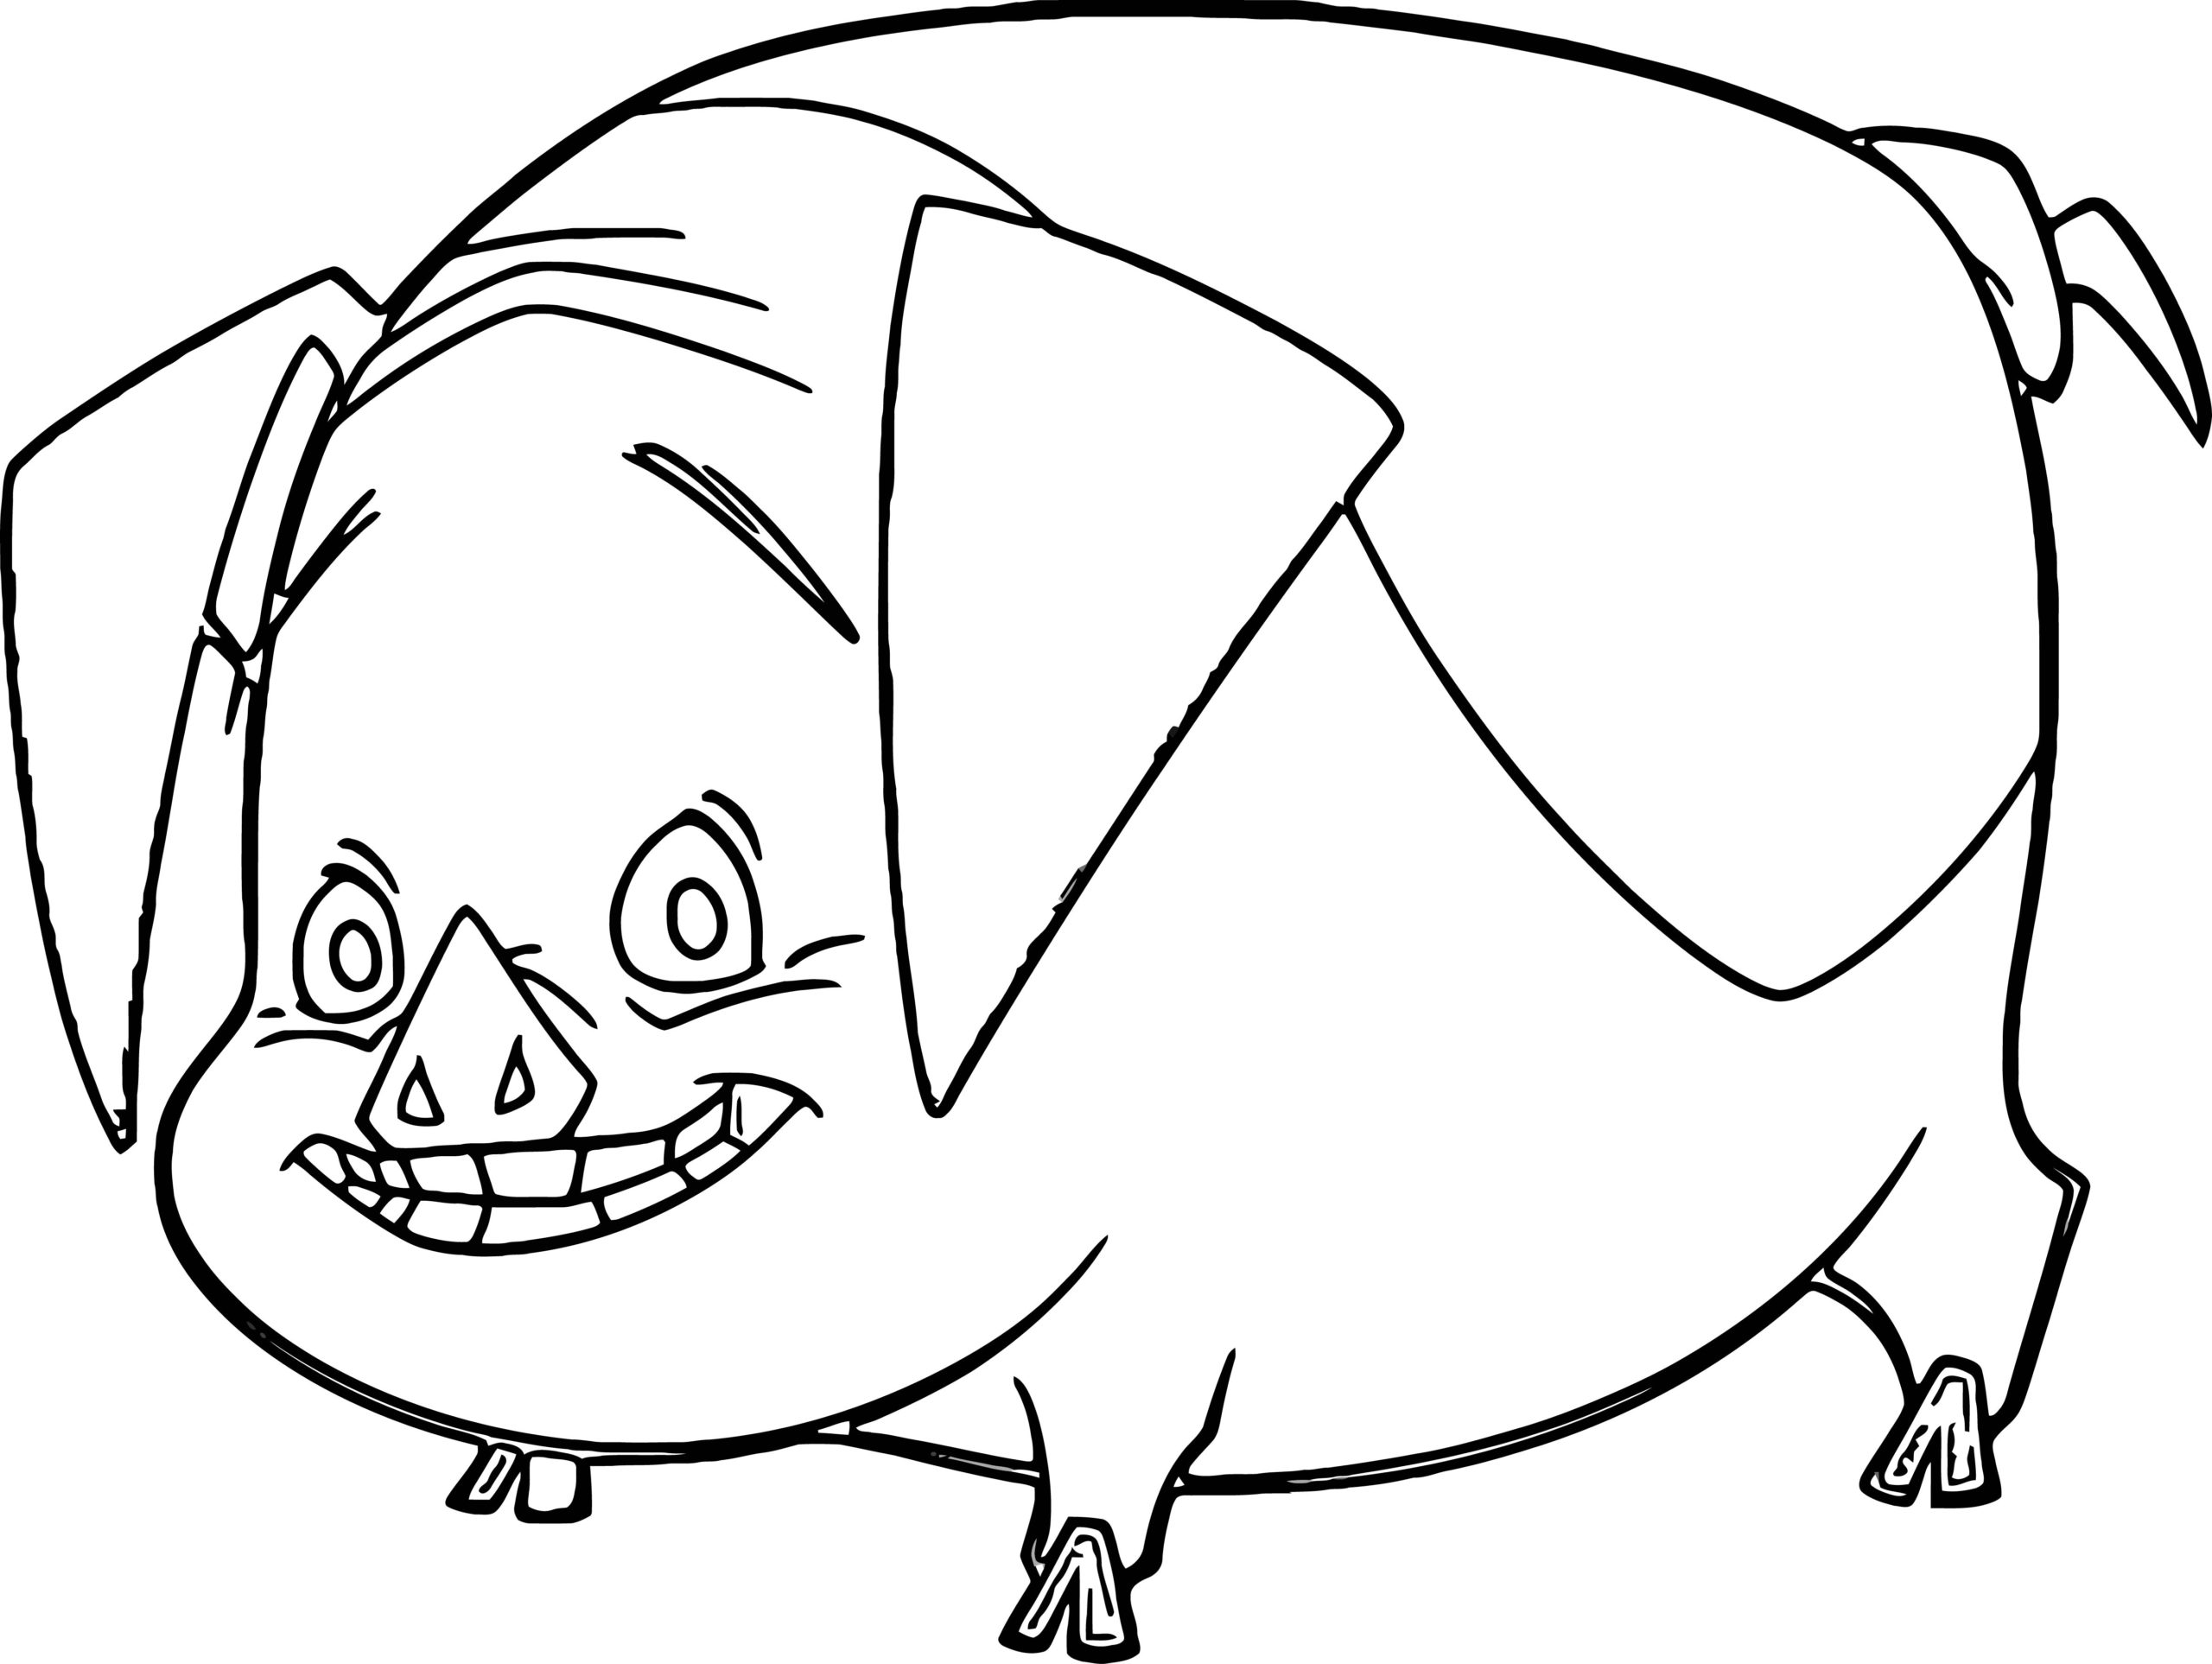 Coloring Pages : Coloring Flowers Letmecolor Home On The Range Pig ...